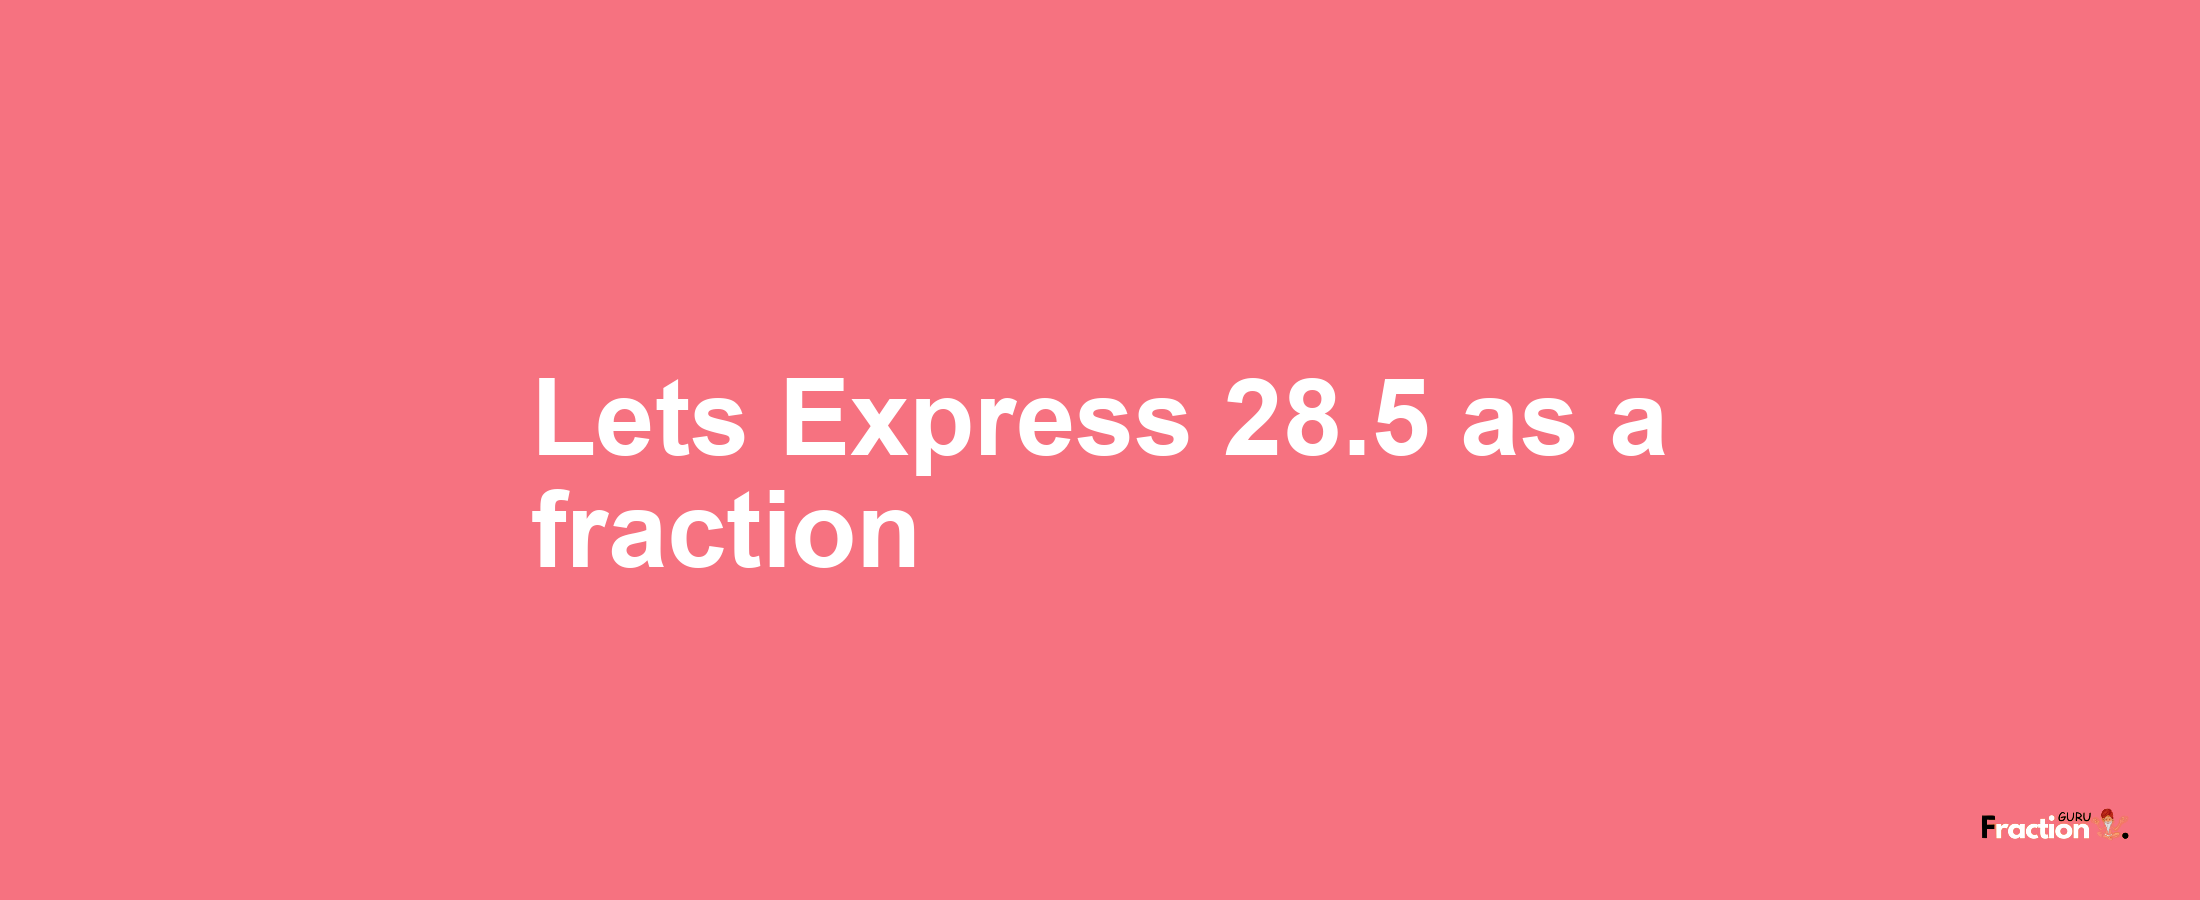 Lets Express 28.5 as afraction